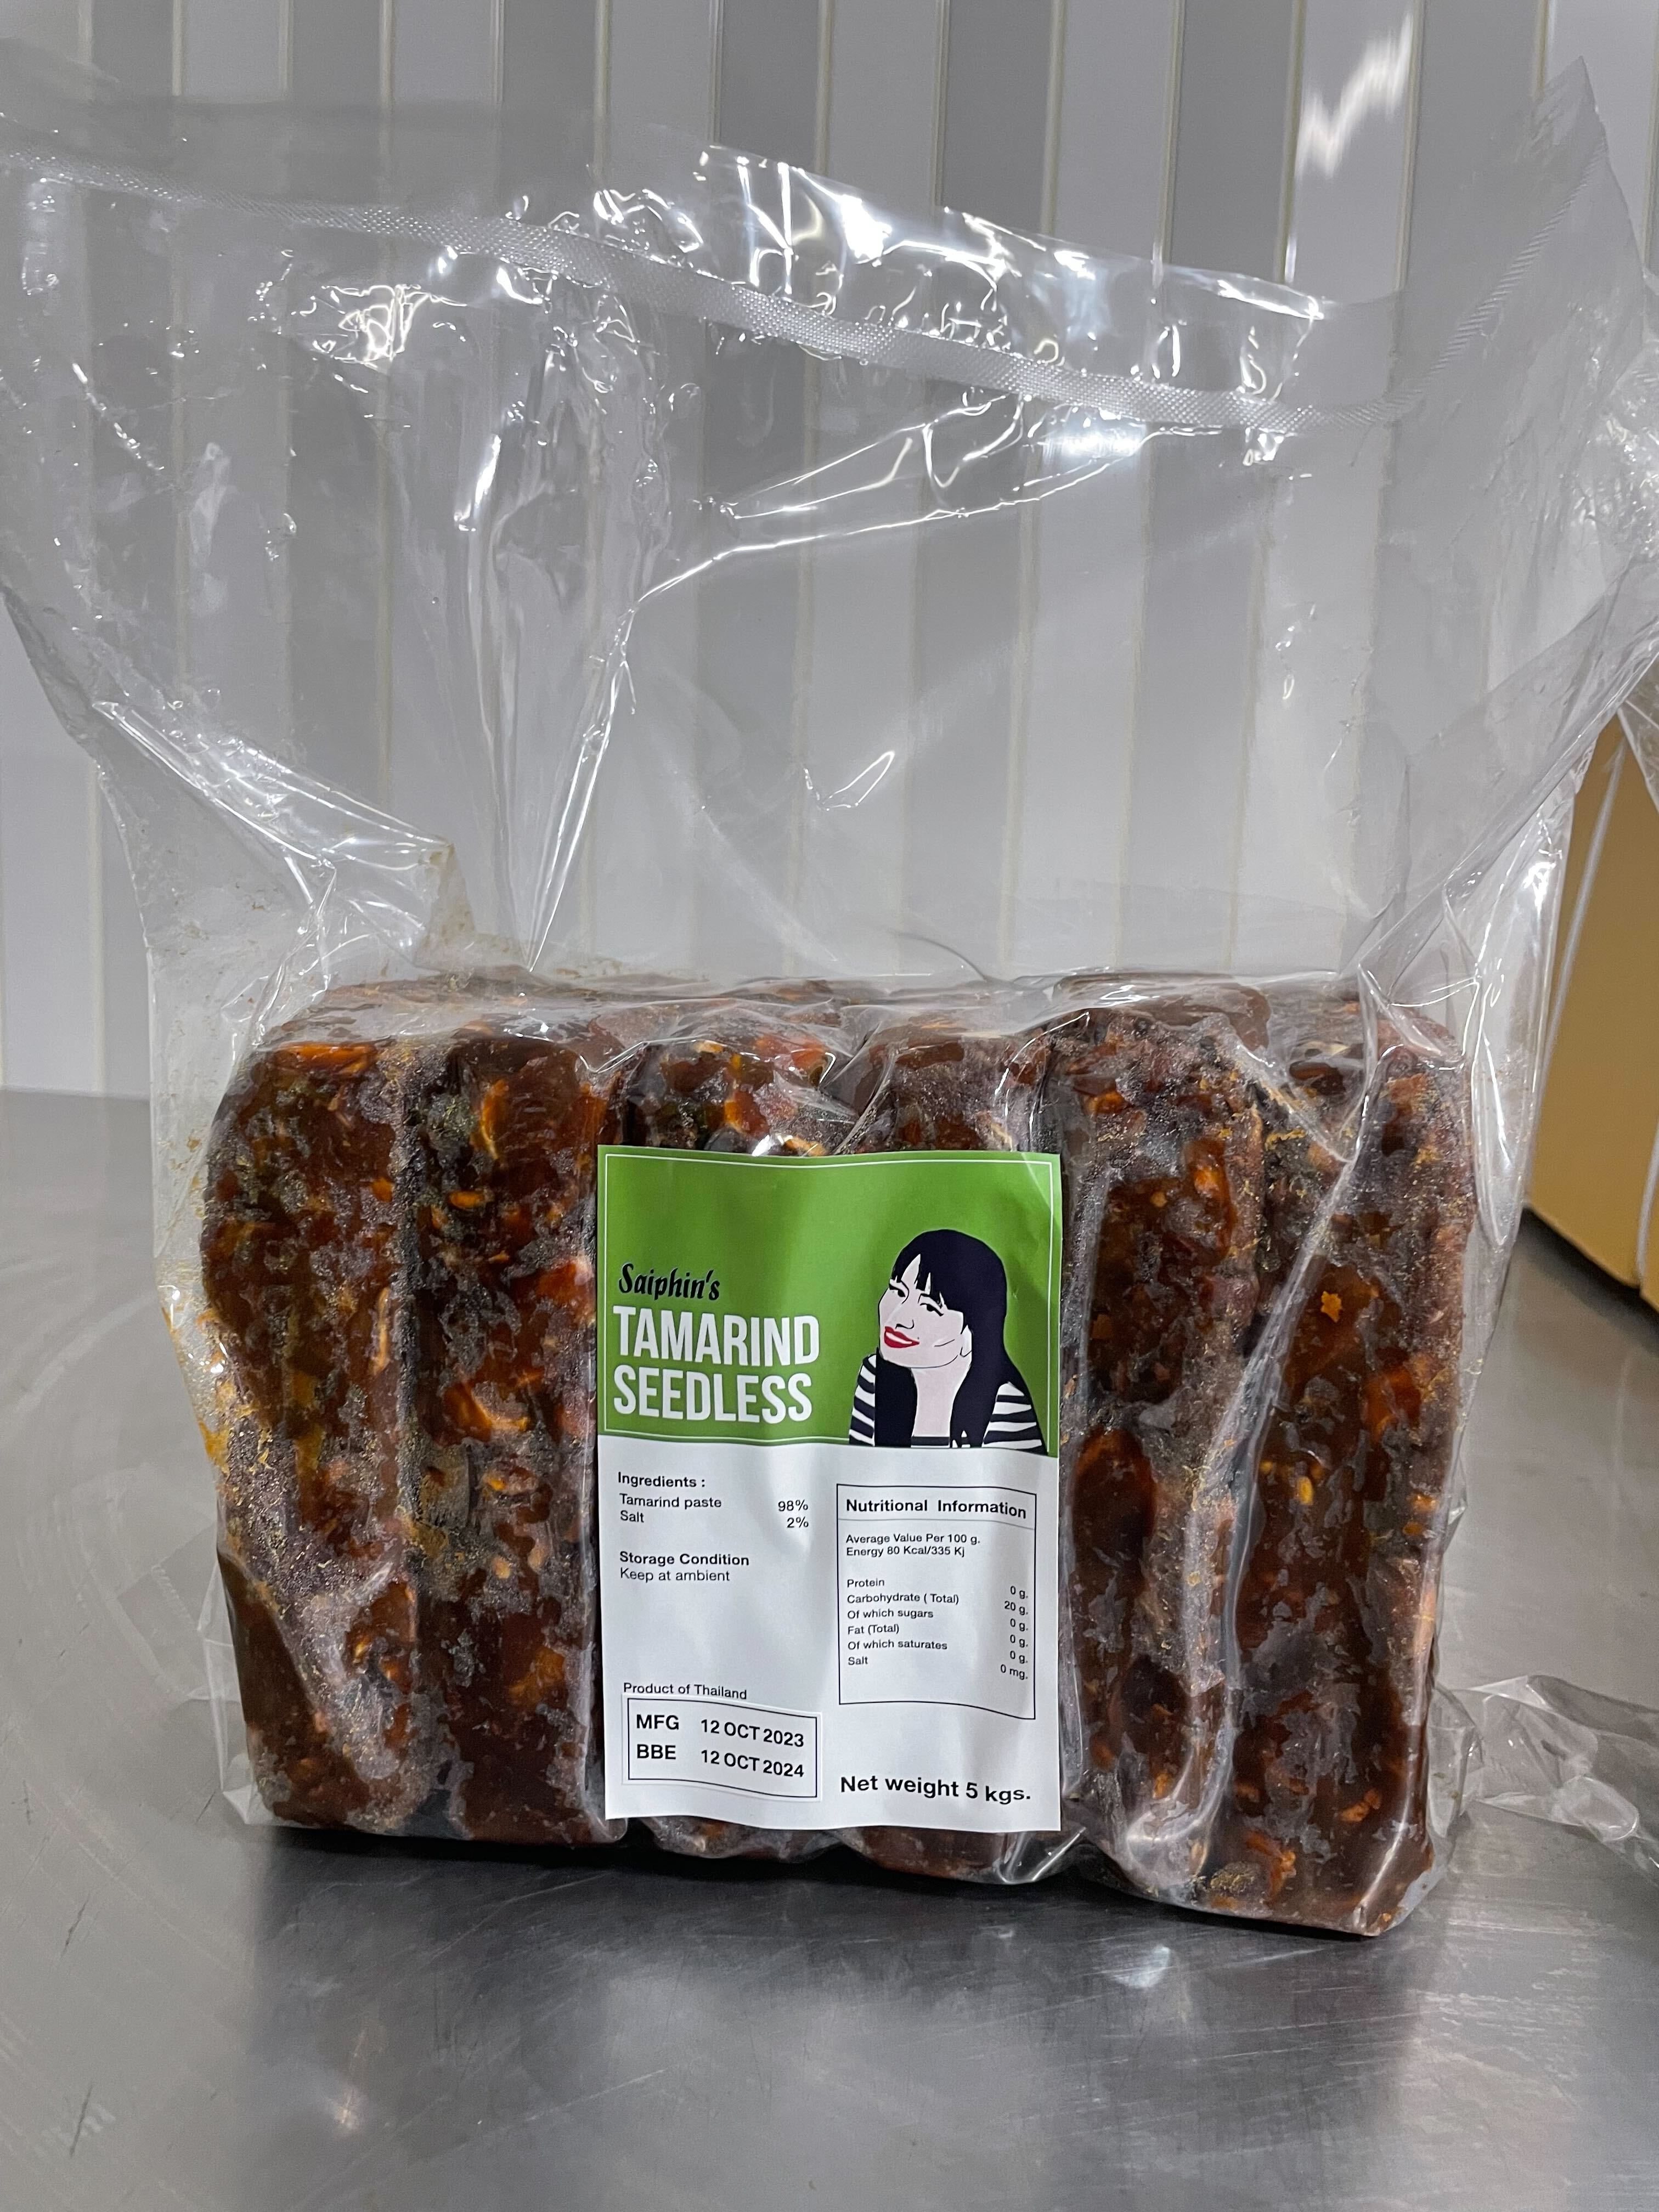 Tamarind is an essential component of the base sauce for pad thai